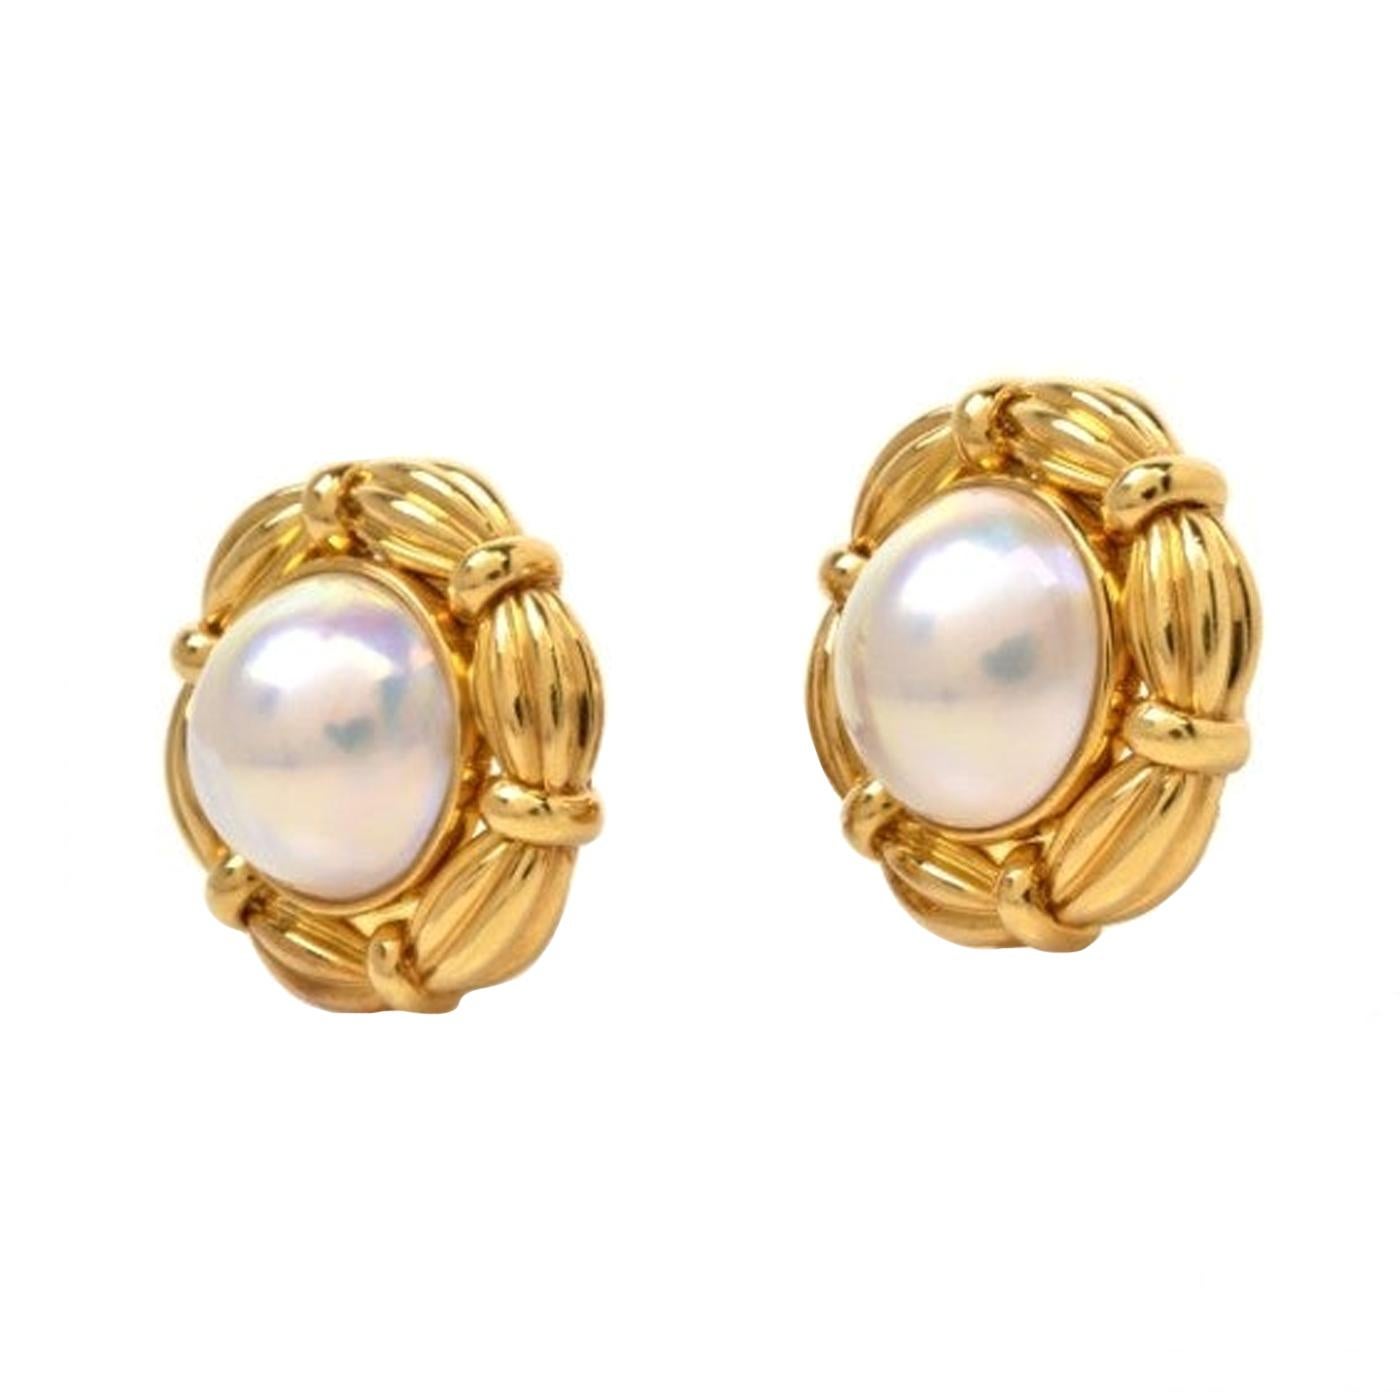 These estate authentic Tiffany & Co. earrings are crafted in solid 18K yellow gold and weigh approximately 30.4 grams. In an alluring floral design, these earrings are centered with a duo of iridescent Mabe pearls, measuring approx. 30mm in diameter